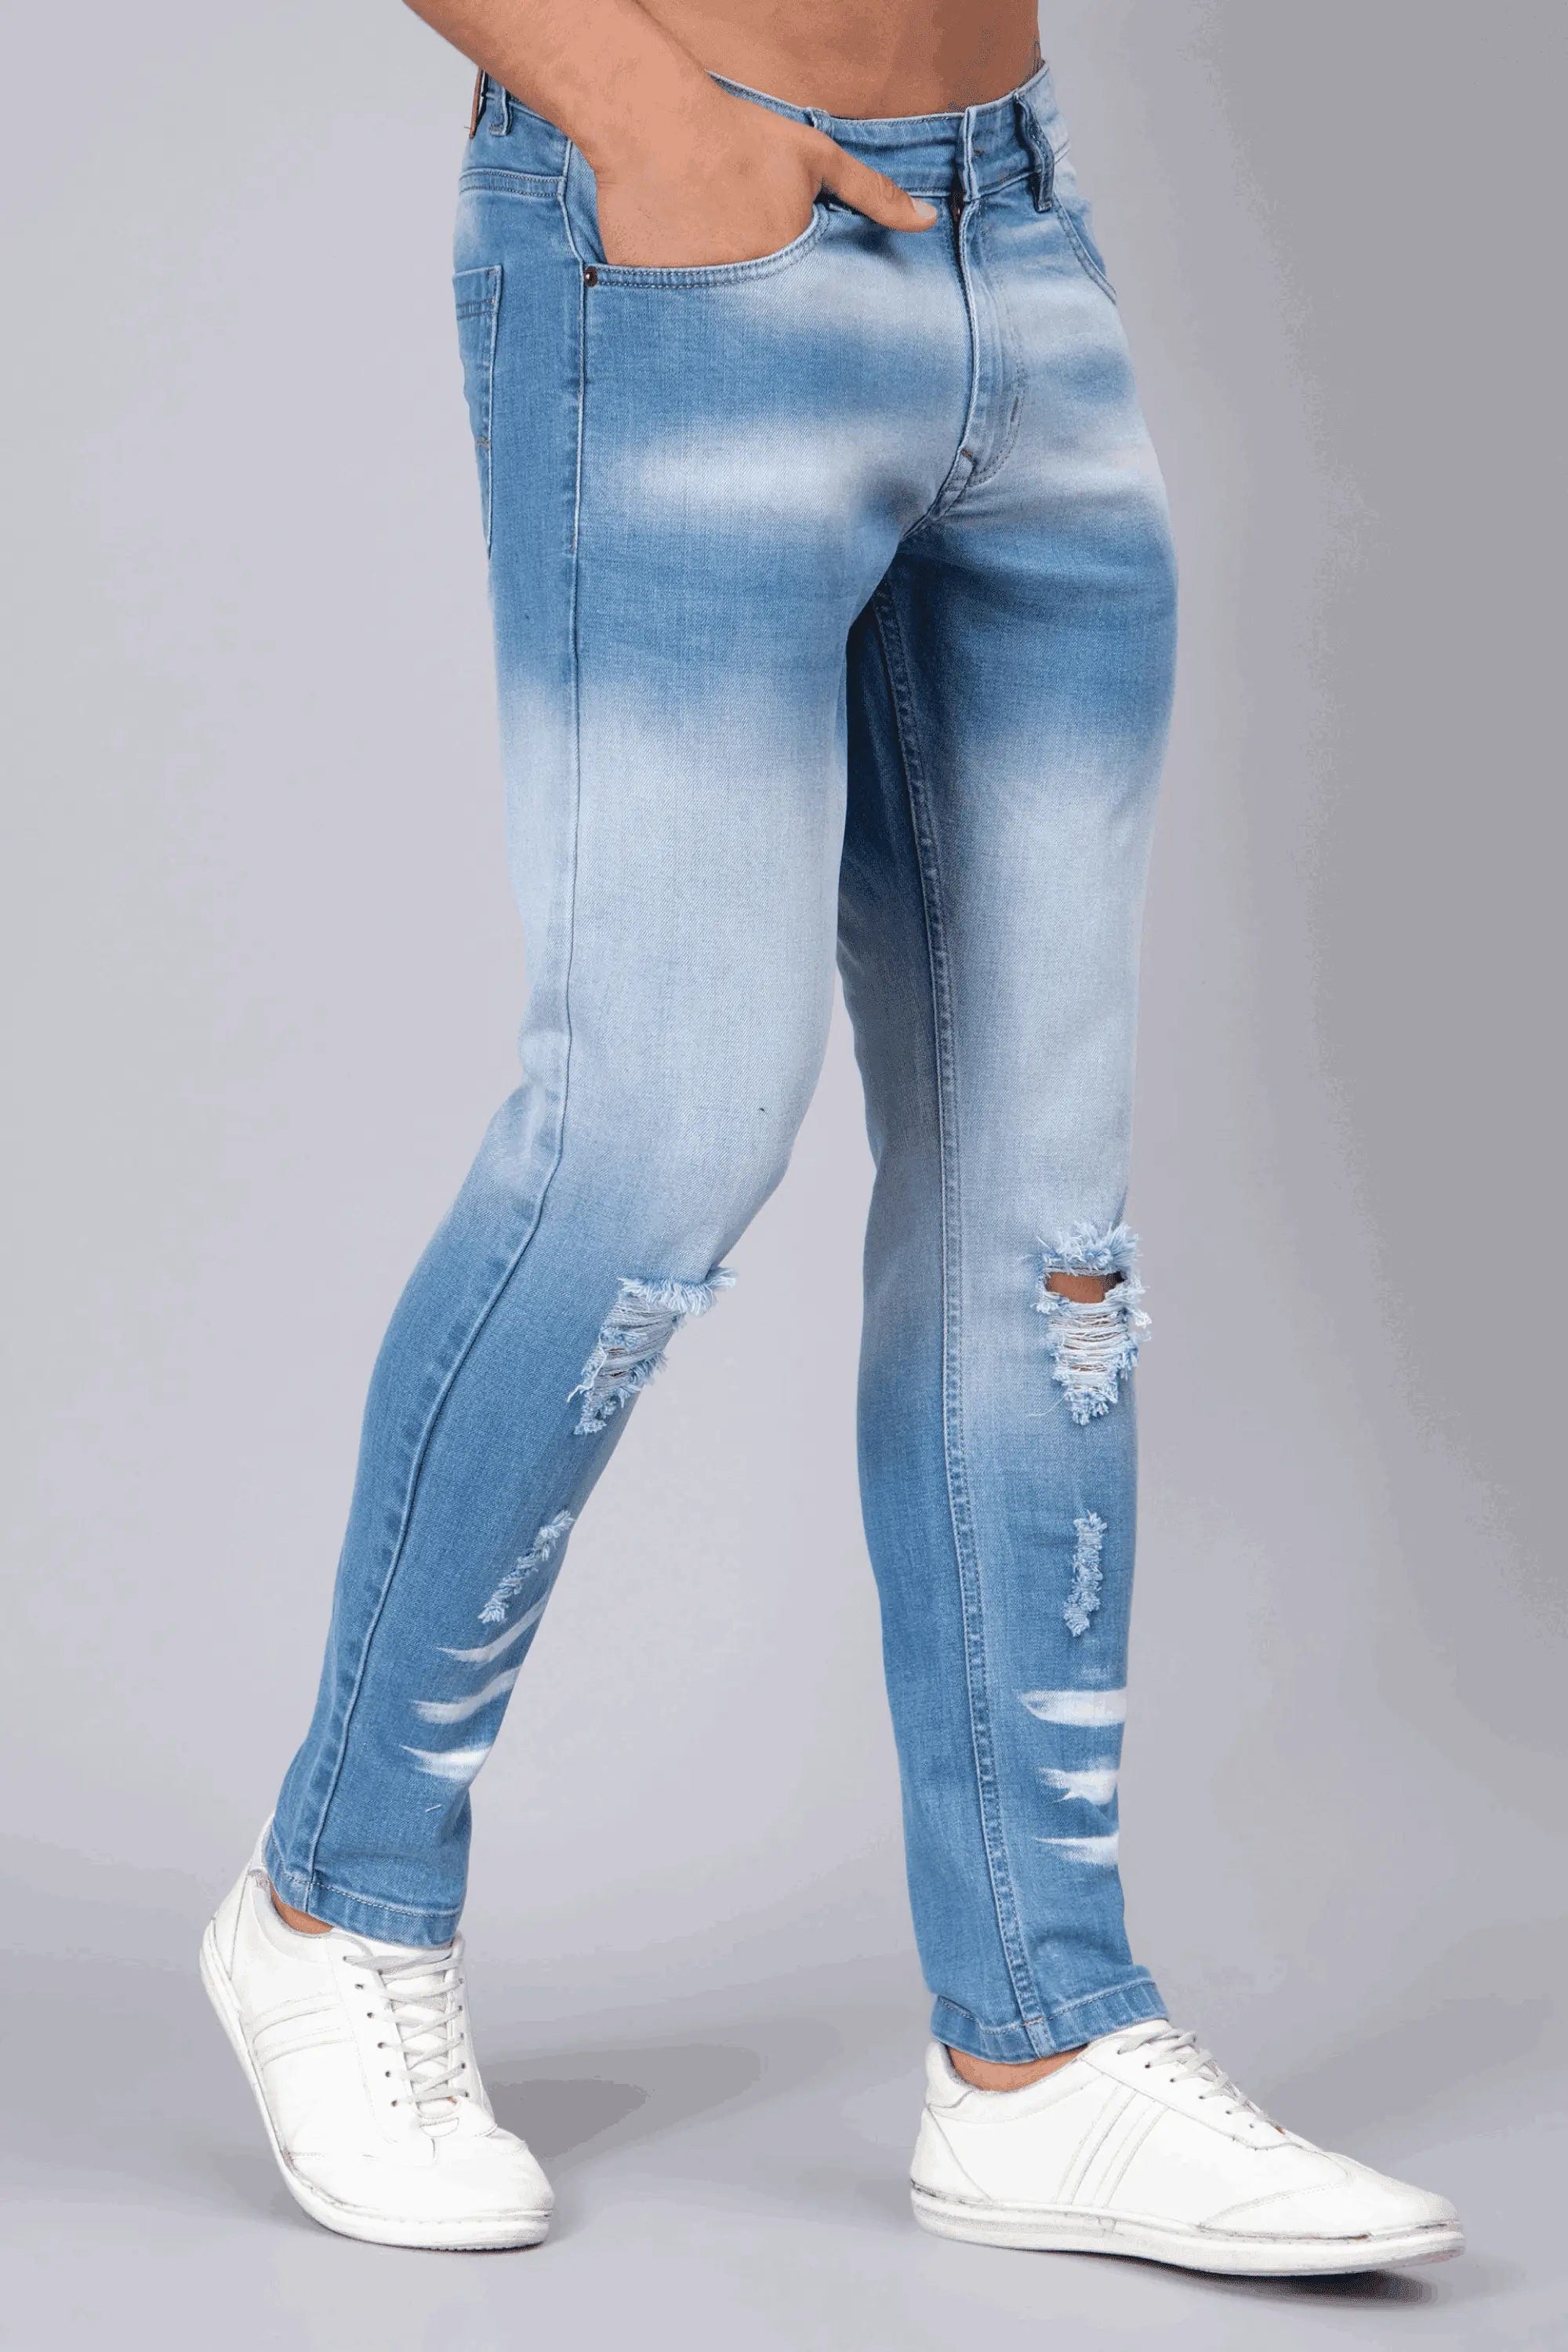 Aflash - Indigo Denim Skinny Fit Women's Jeans ( Pack of 1 ) - Buy Aflash -  Indigo Denim Skinny Fit Women's Jeans ( Pack of 1 ) Online at Best Prices  in India on Snapdeal